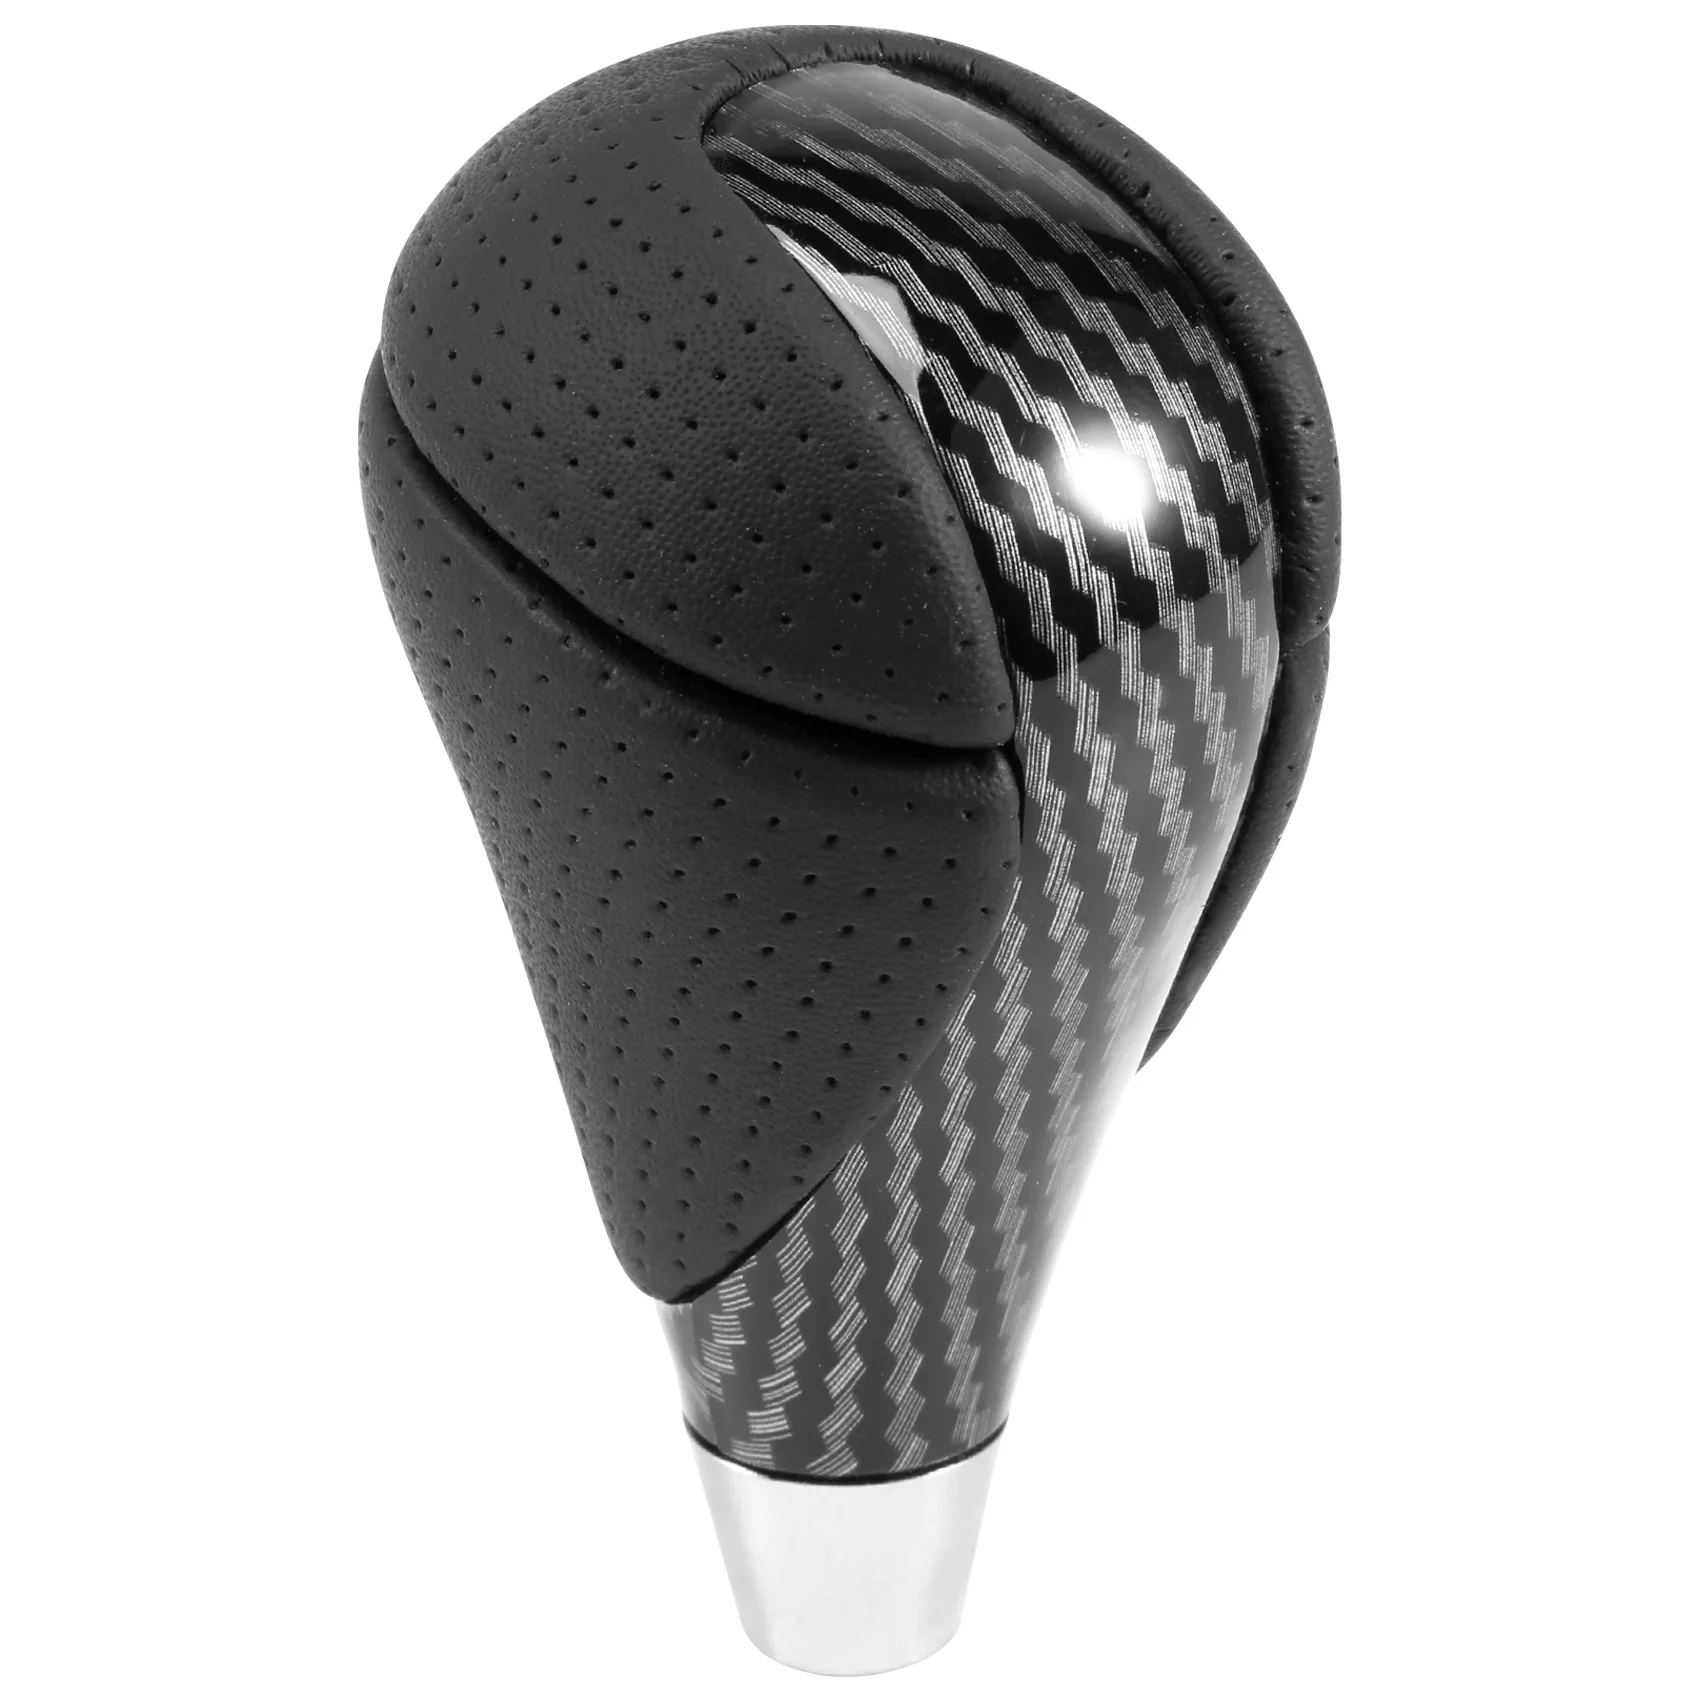 

ABS Carbon Fiber Gear Shift Knob for Most Toyota Lexus Crown Camry Hiace IS350 GS430 RX350 IS250 ES350 RX450H LX470